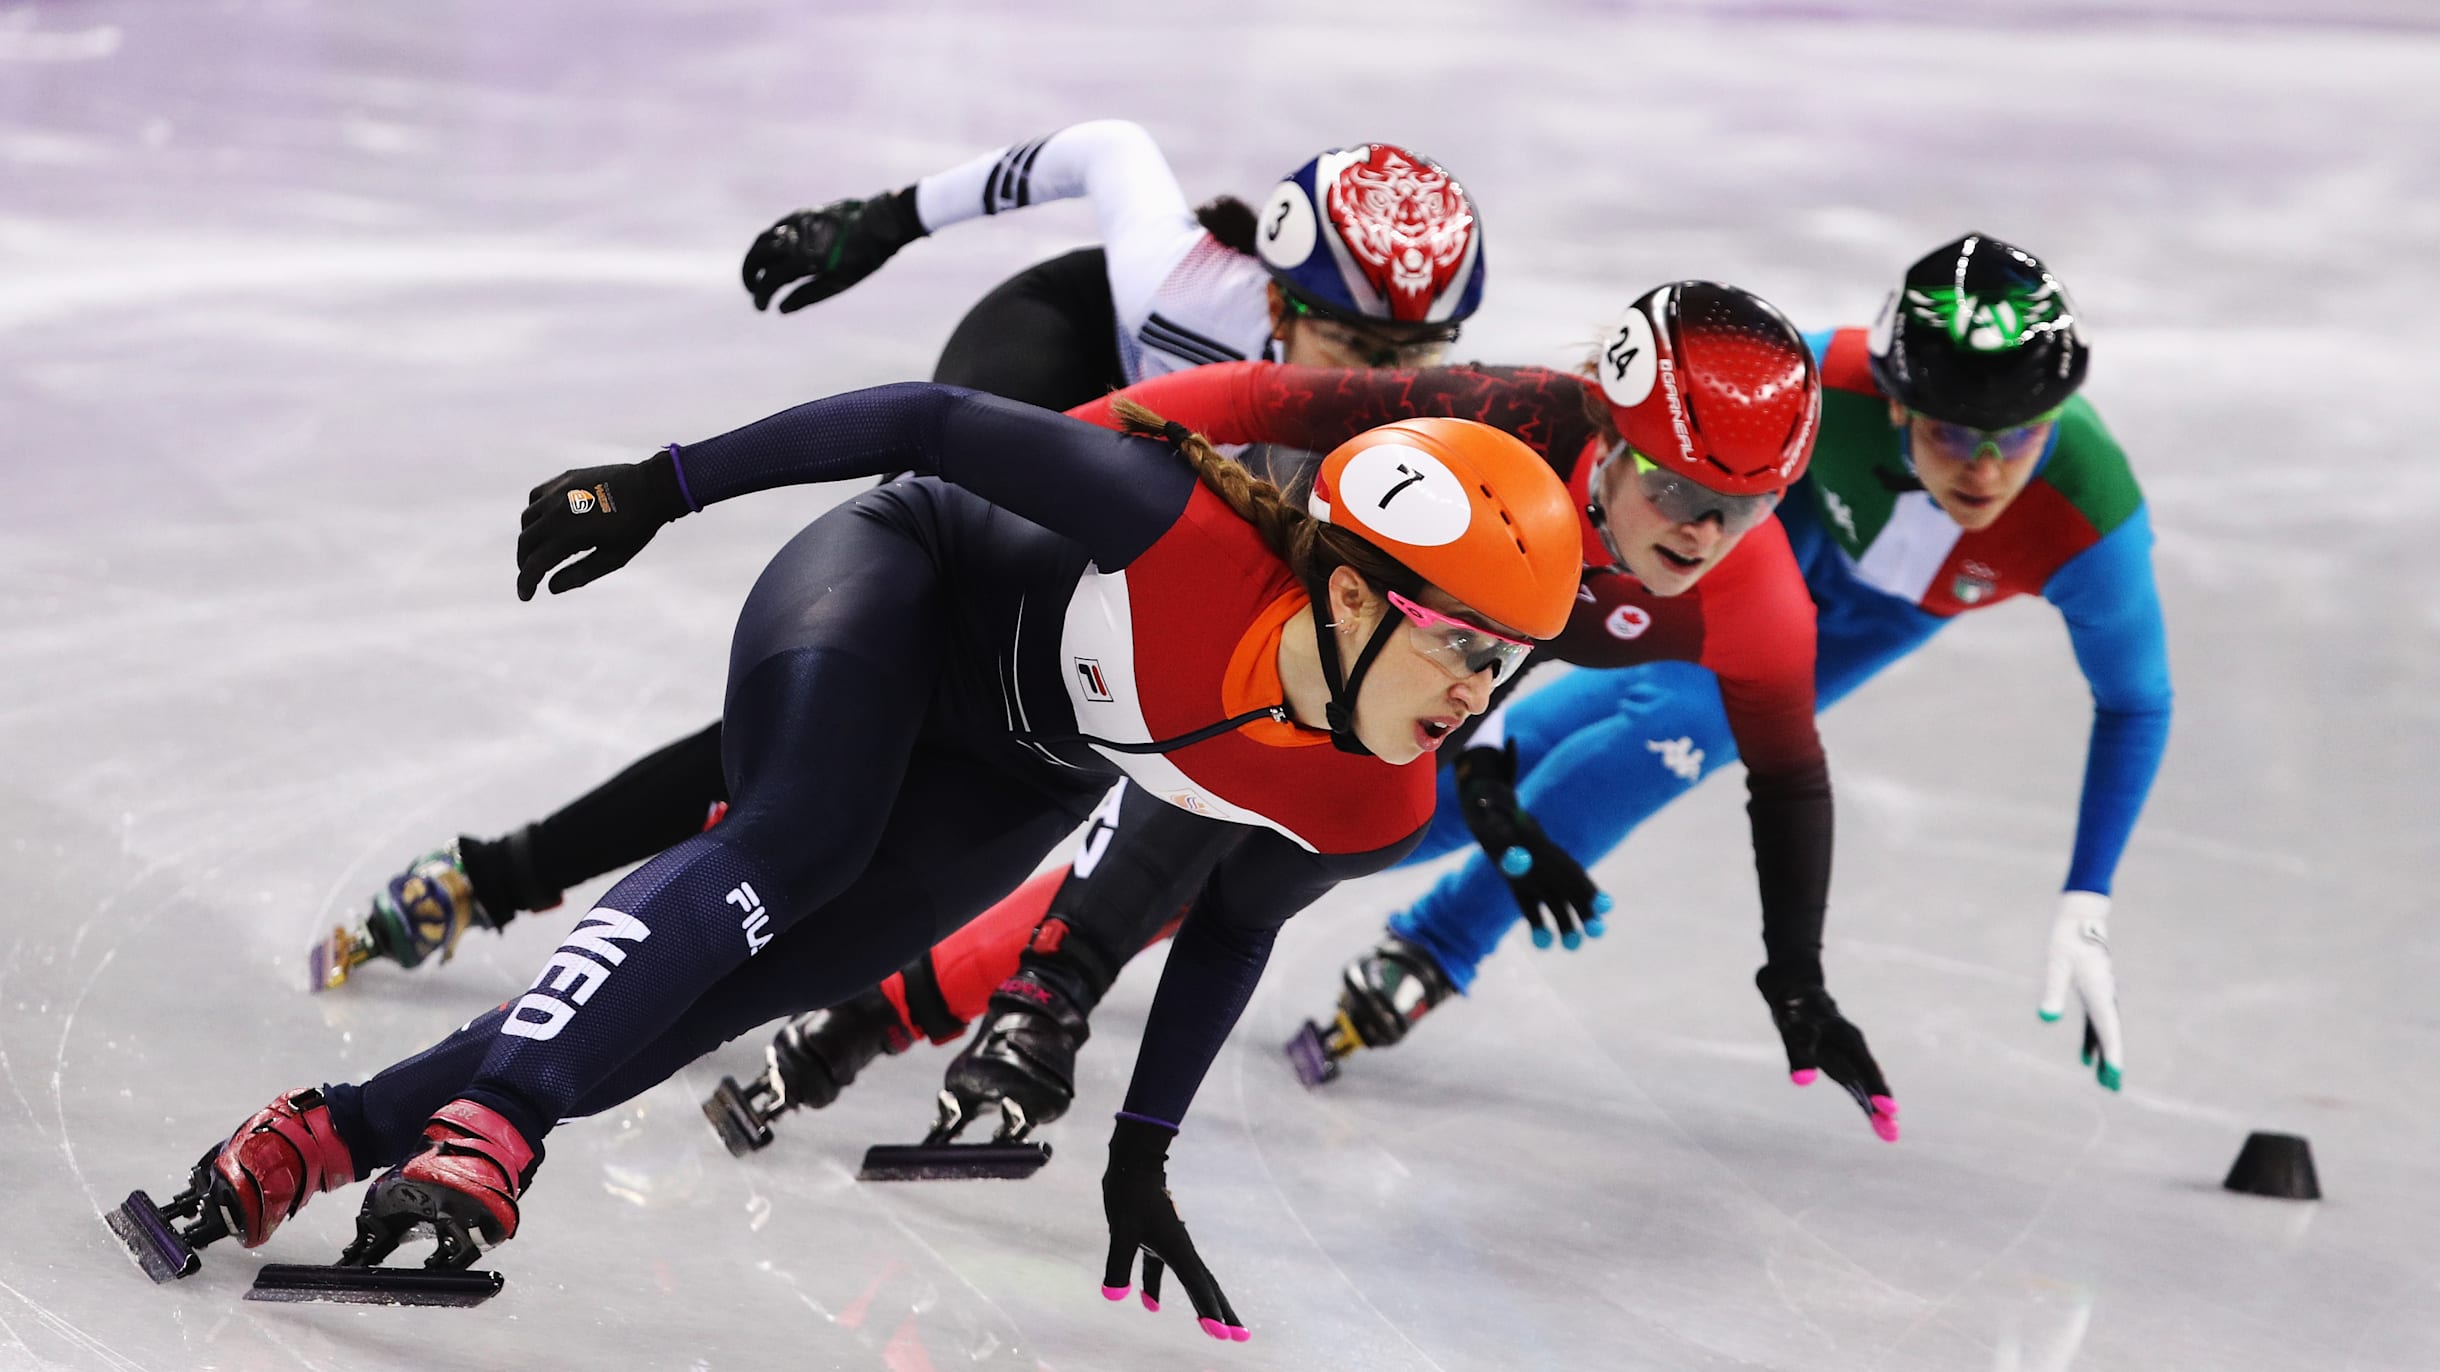 Olympic short track speed skating at Beijing 2022: Top five things to know